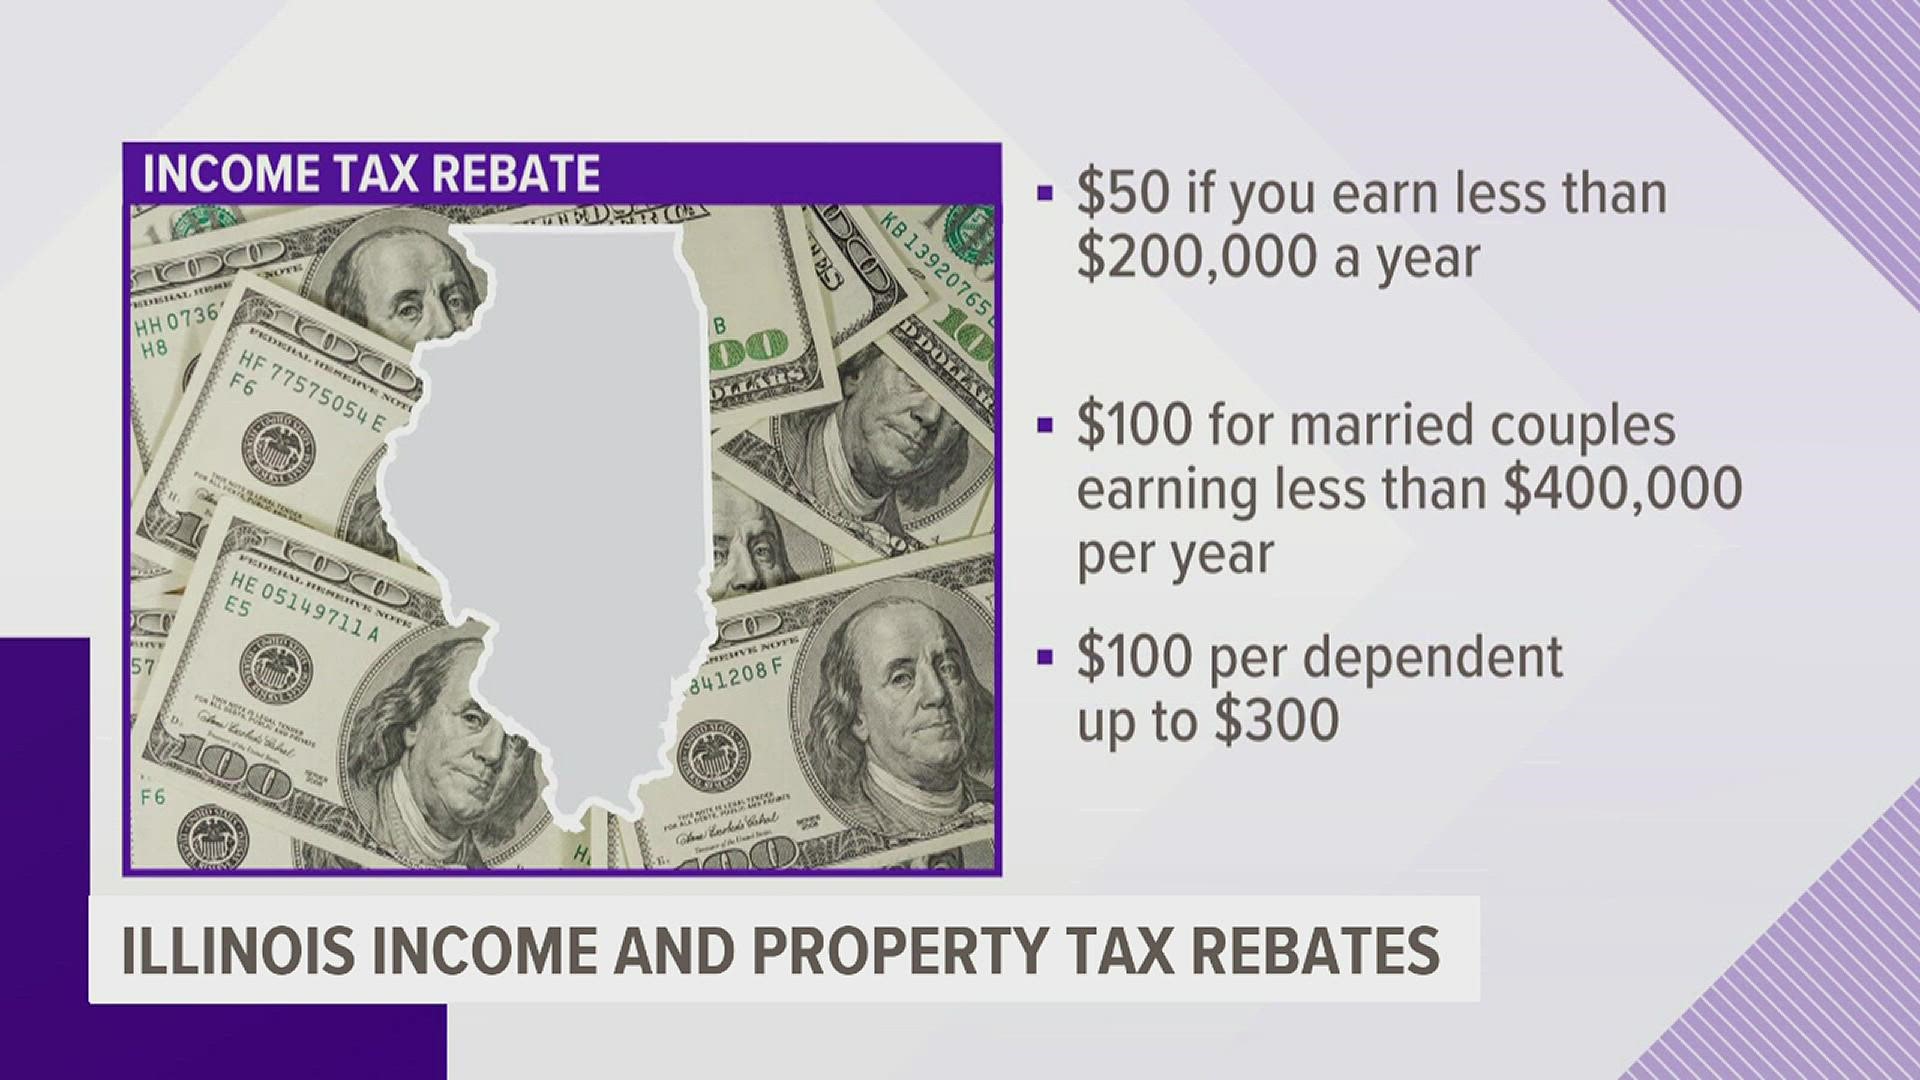 Illinois sending out rebate checks to some residents | wqad.com